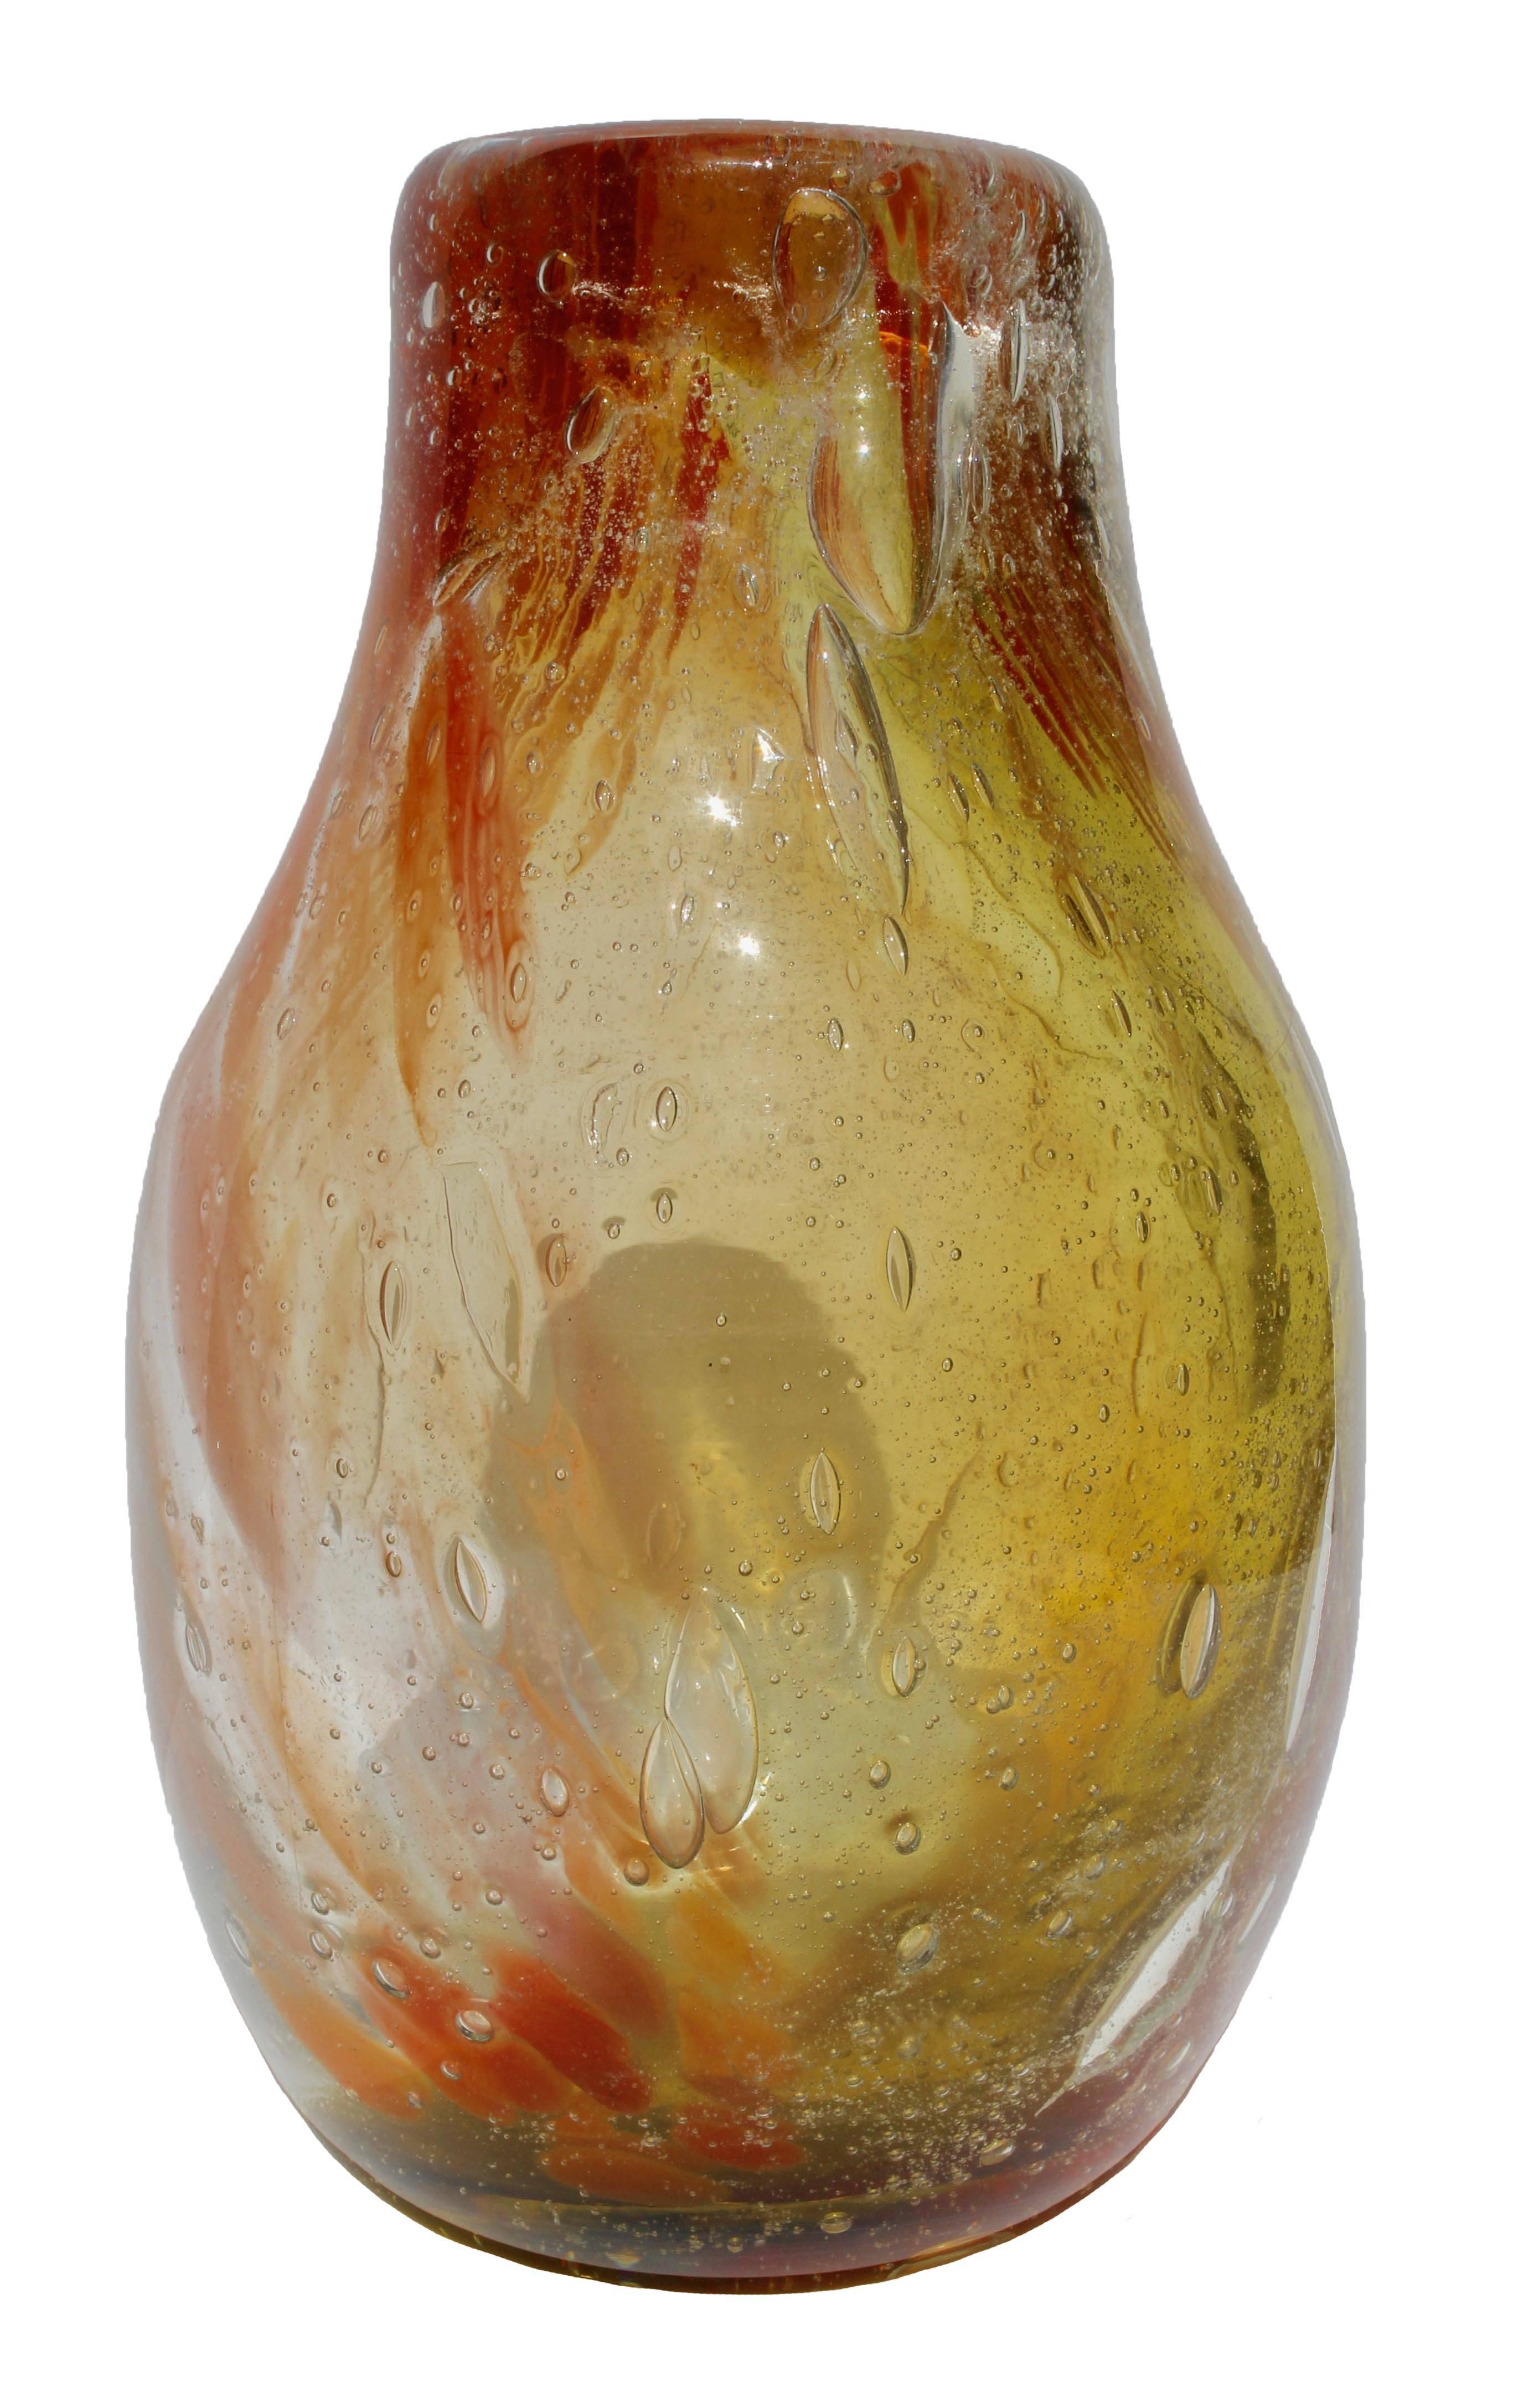 The piece is unique.

Clear glass vase in heavy style with embedded color powders and irregularly shaped air bubbles, executed in the hot shop at Val St Lambert, Belgium.
The piece is unique, in excellent condition and a real beauty!
Weight: 102